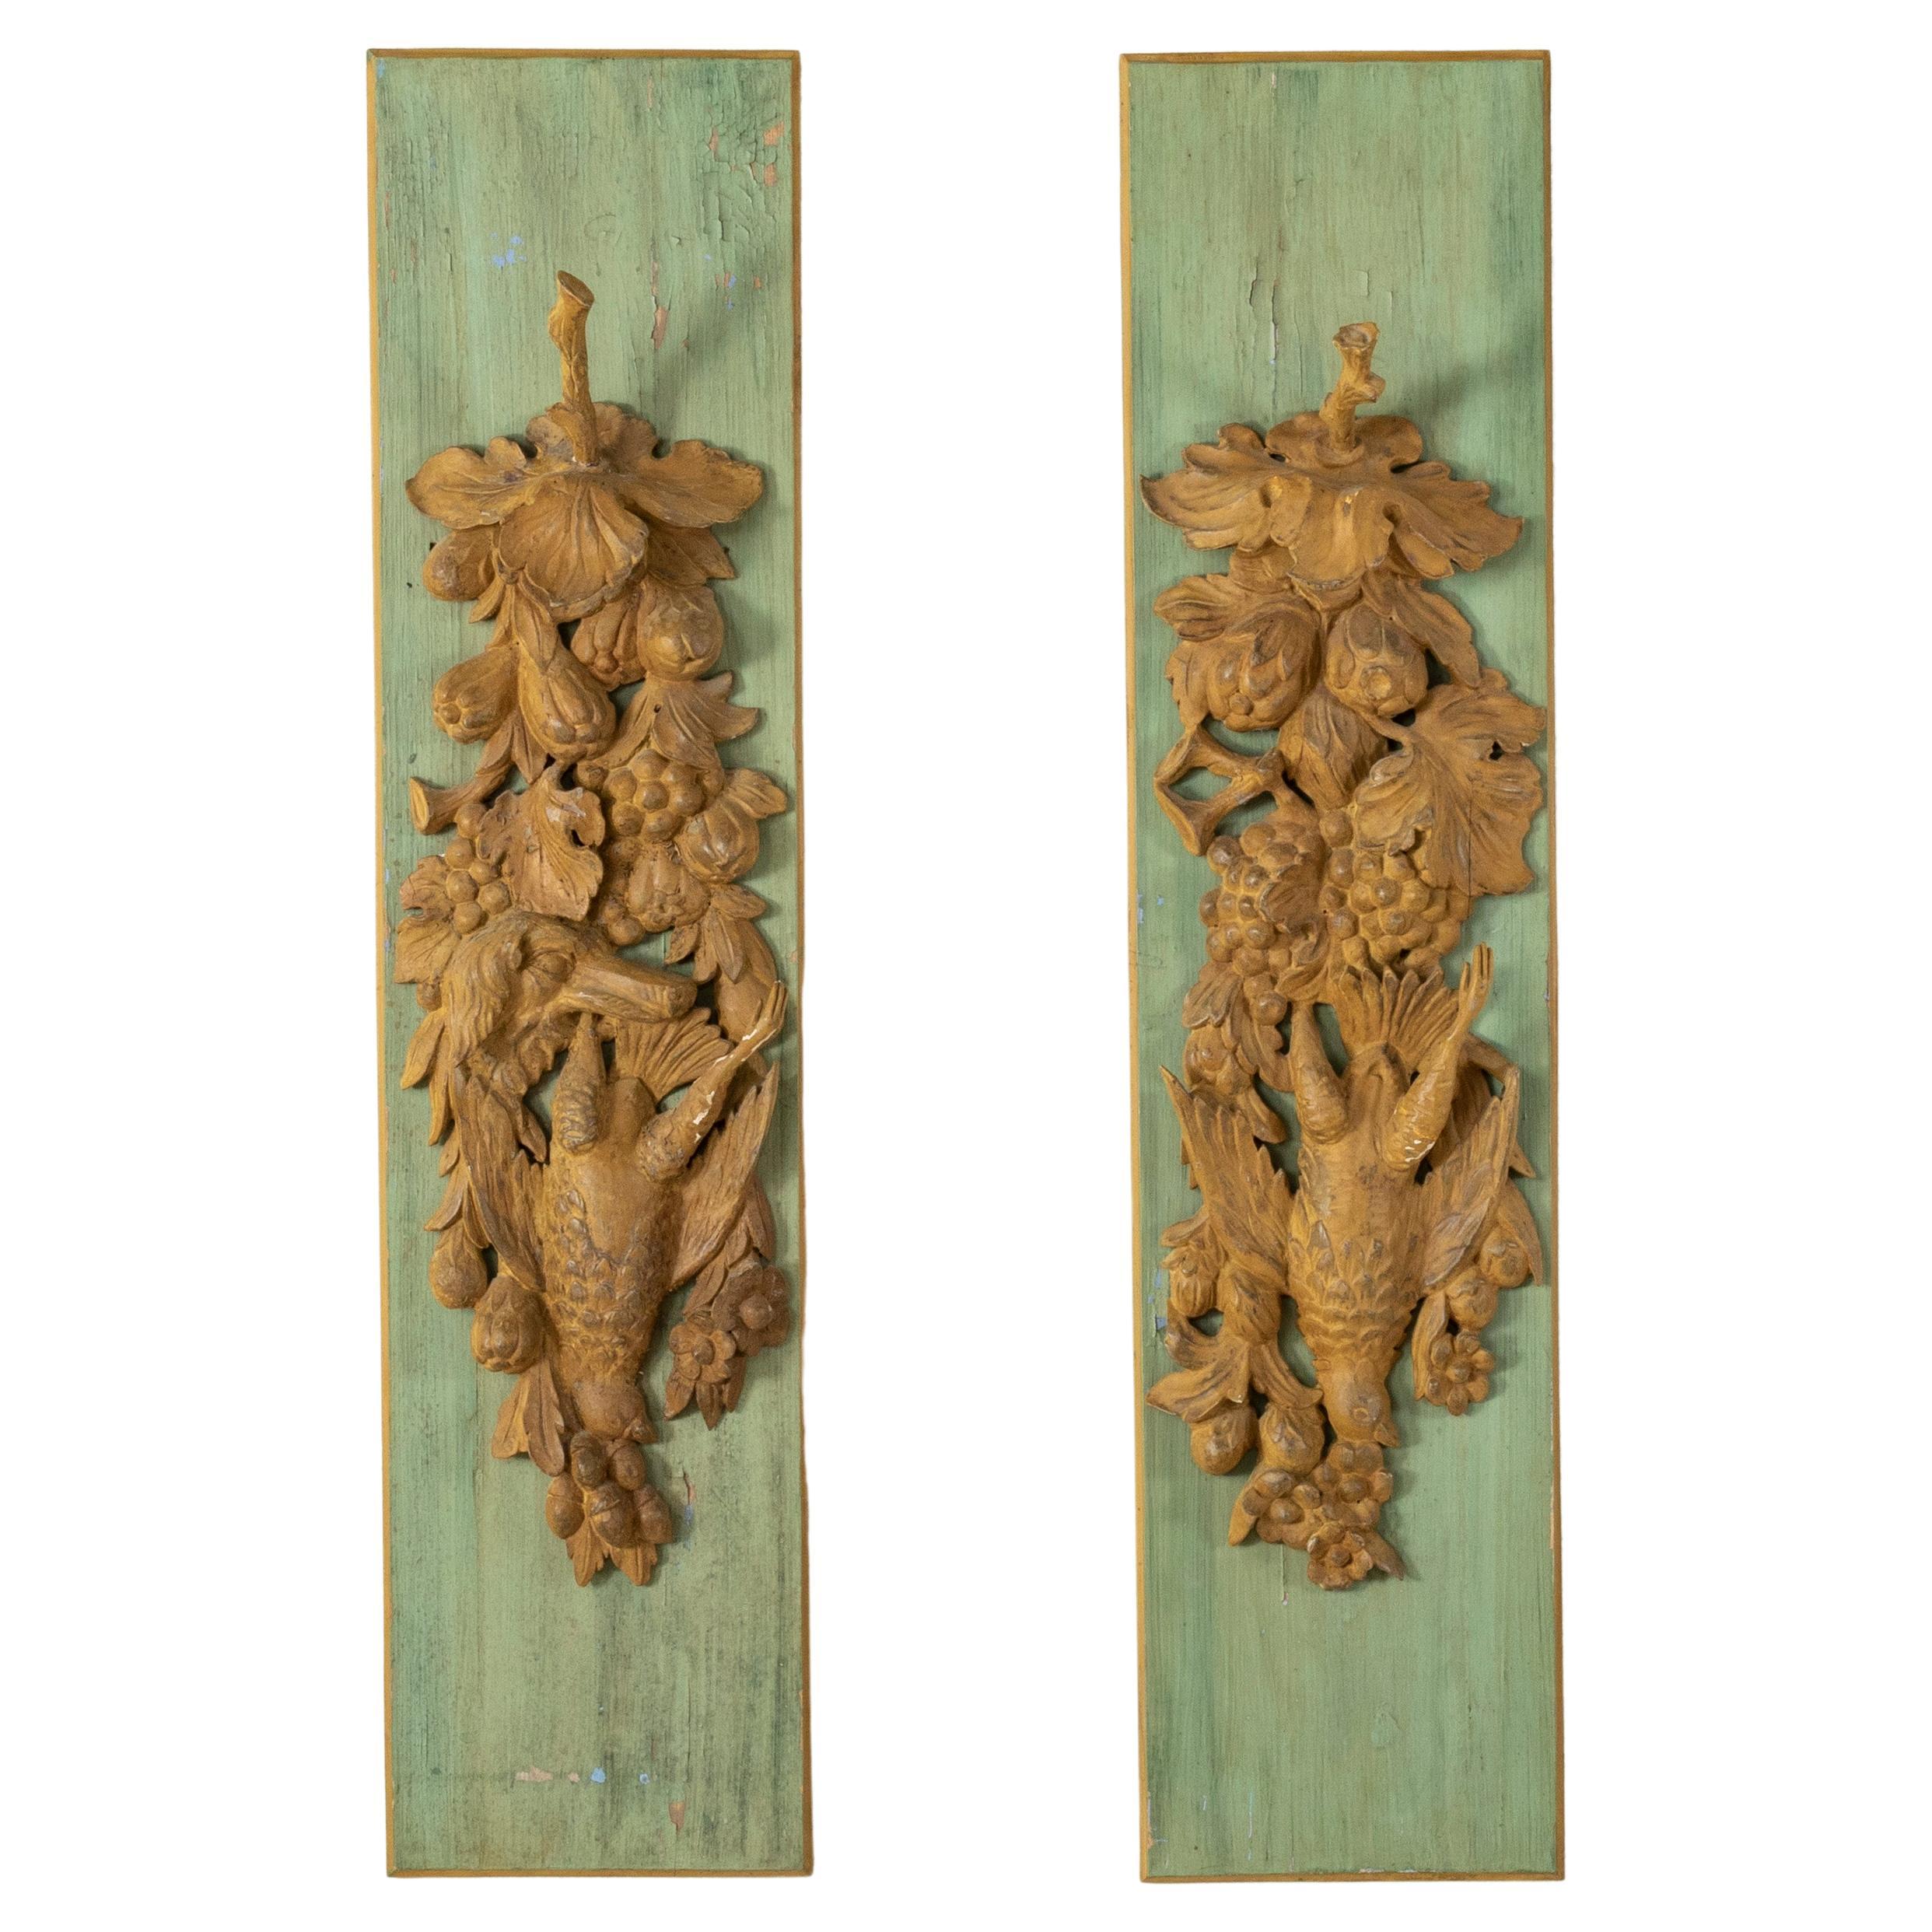 Pair of Late 18th Century French Painted Hand Carved Boiserie Panels